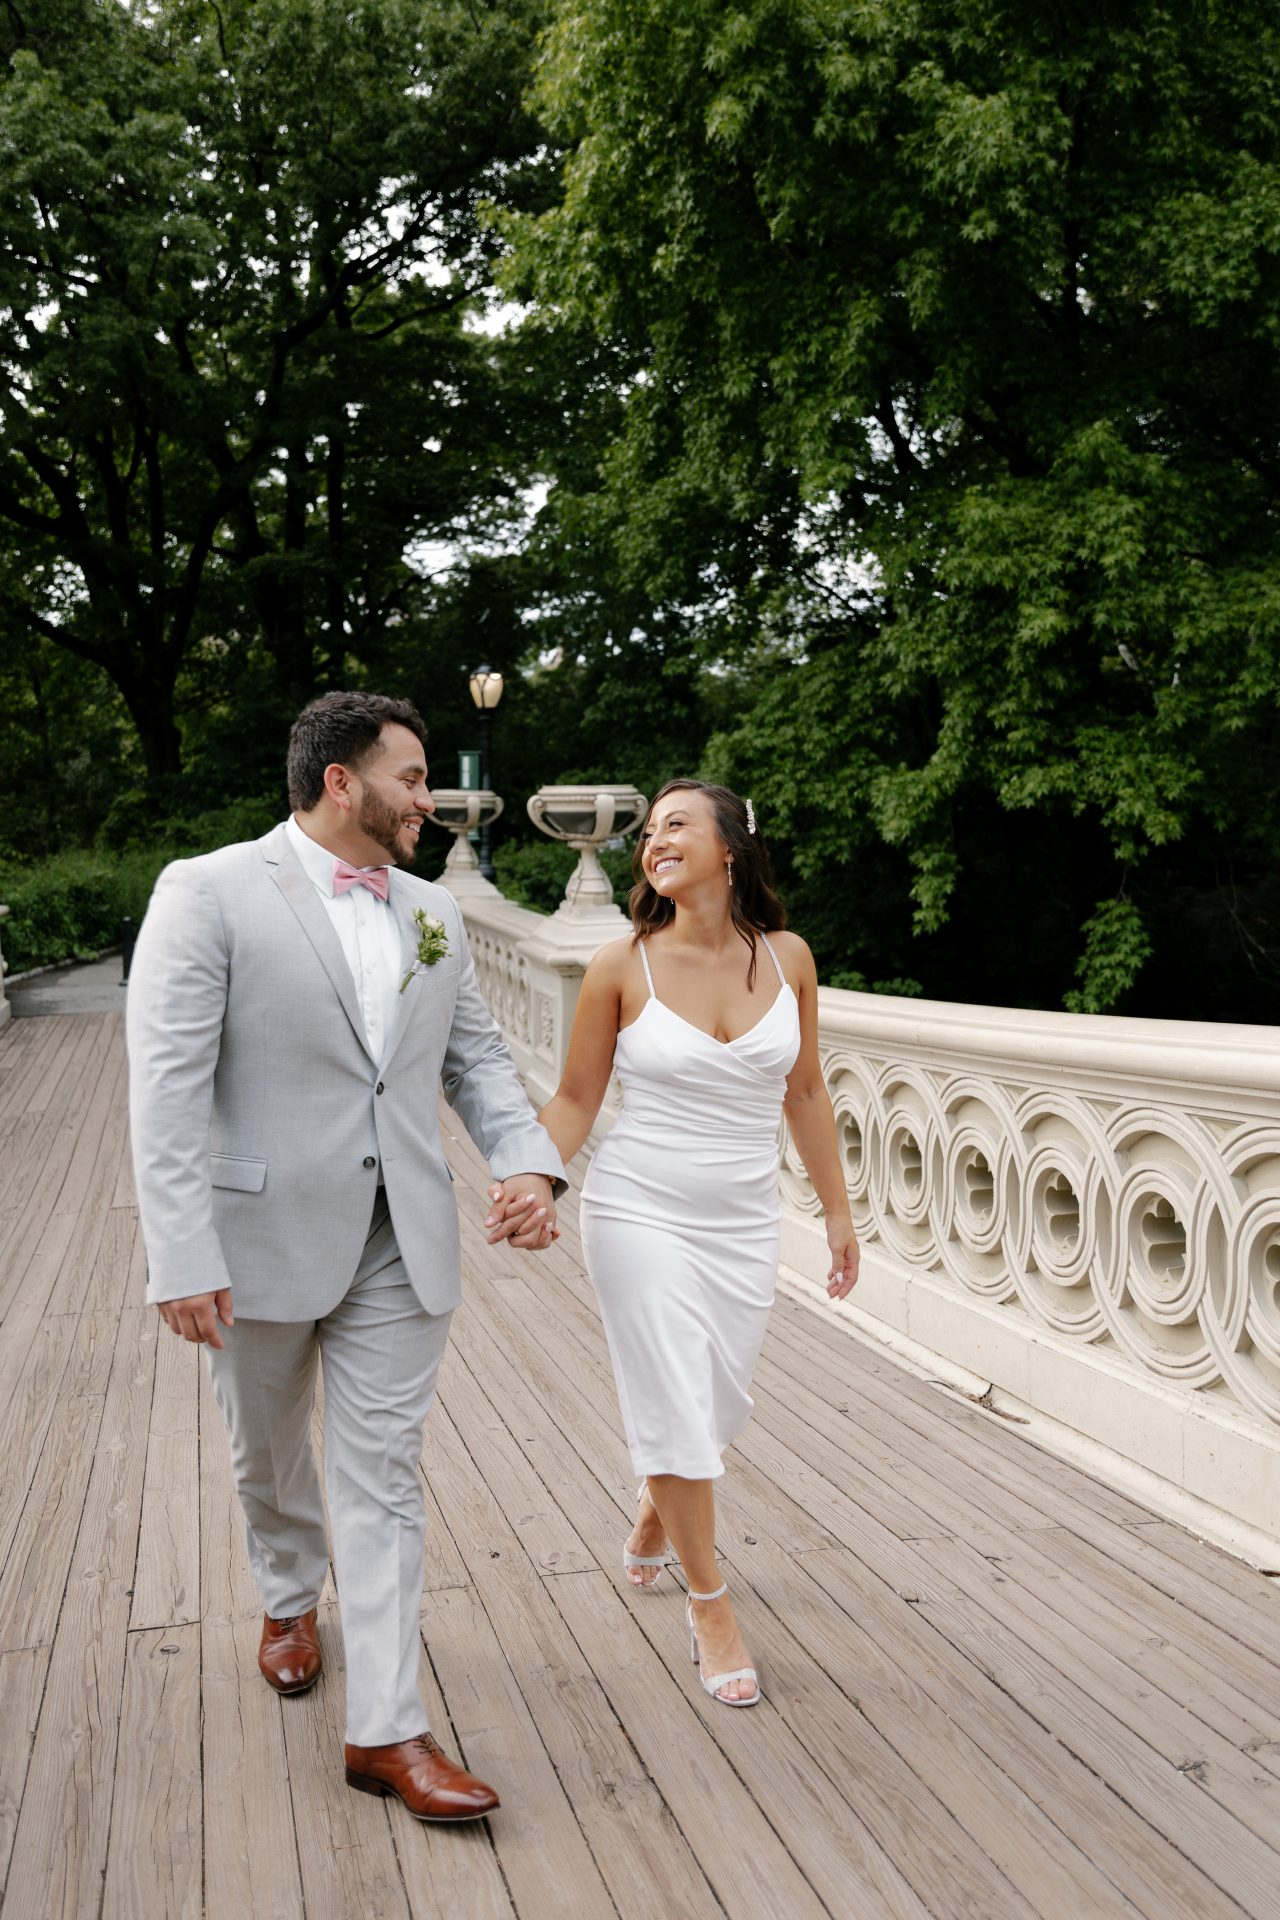 Simple wedding in Central Park NY 14